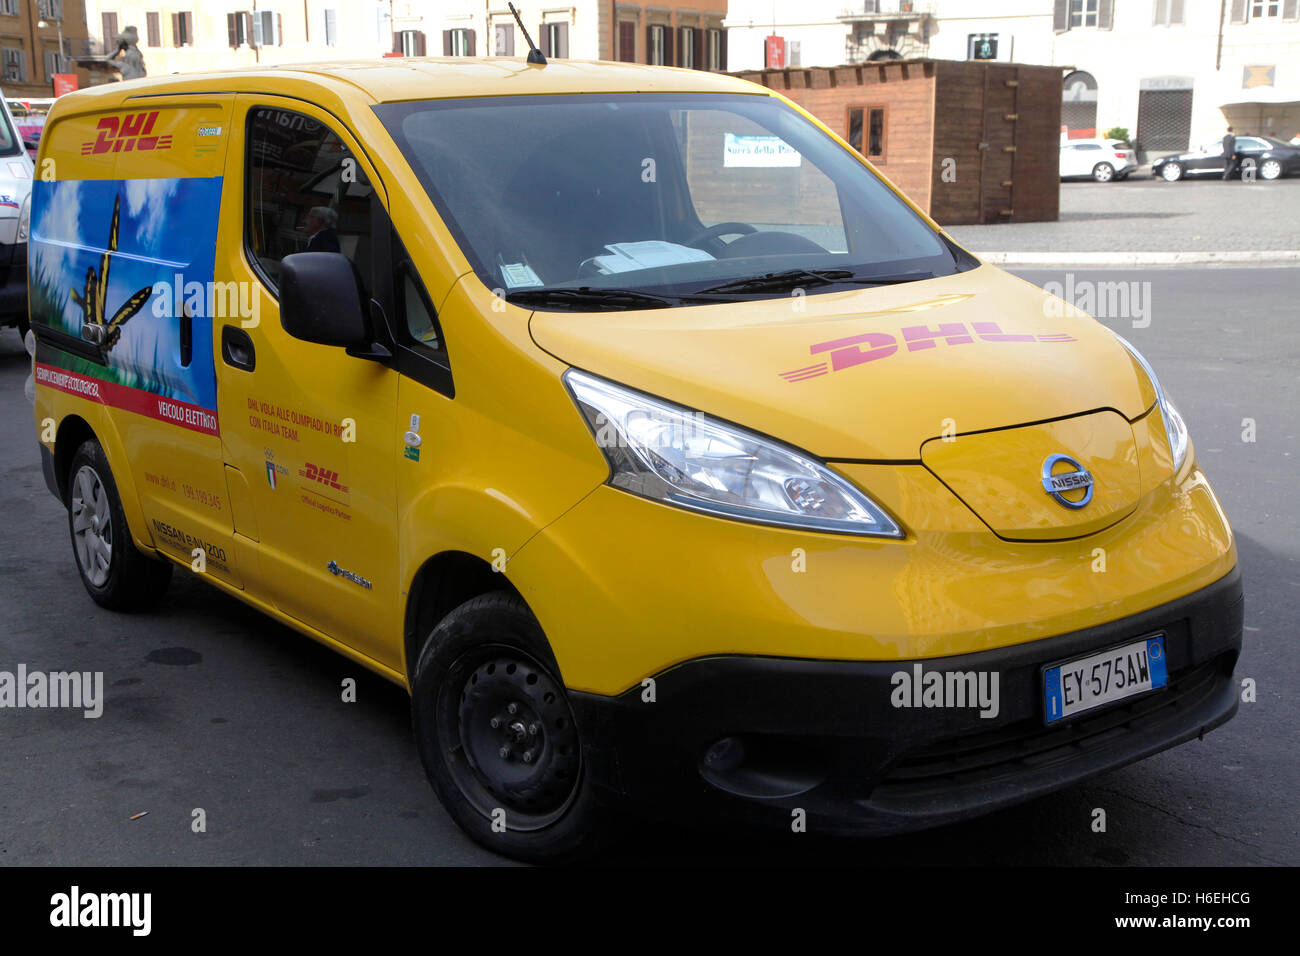 DHL Express truck in midtown Rome. DHL Express providing international express mail services Stock Photo